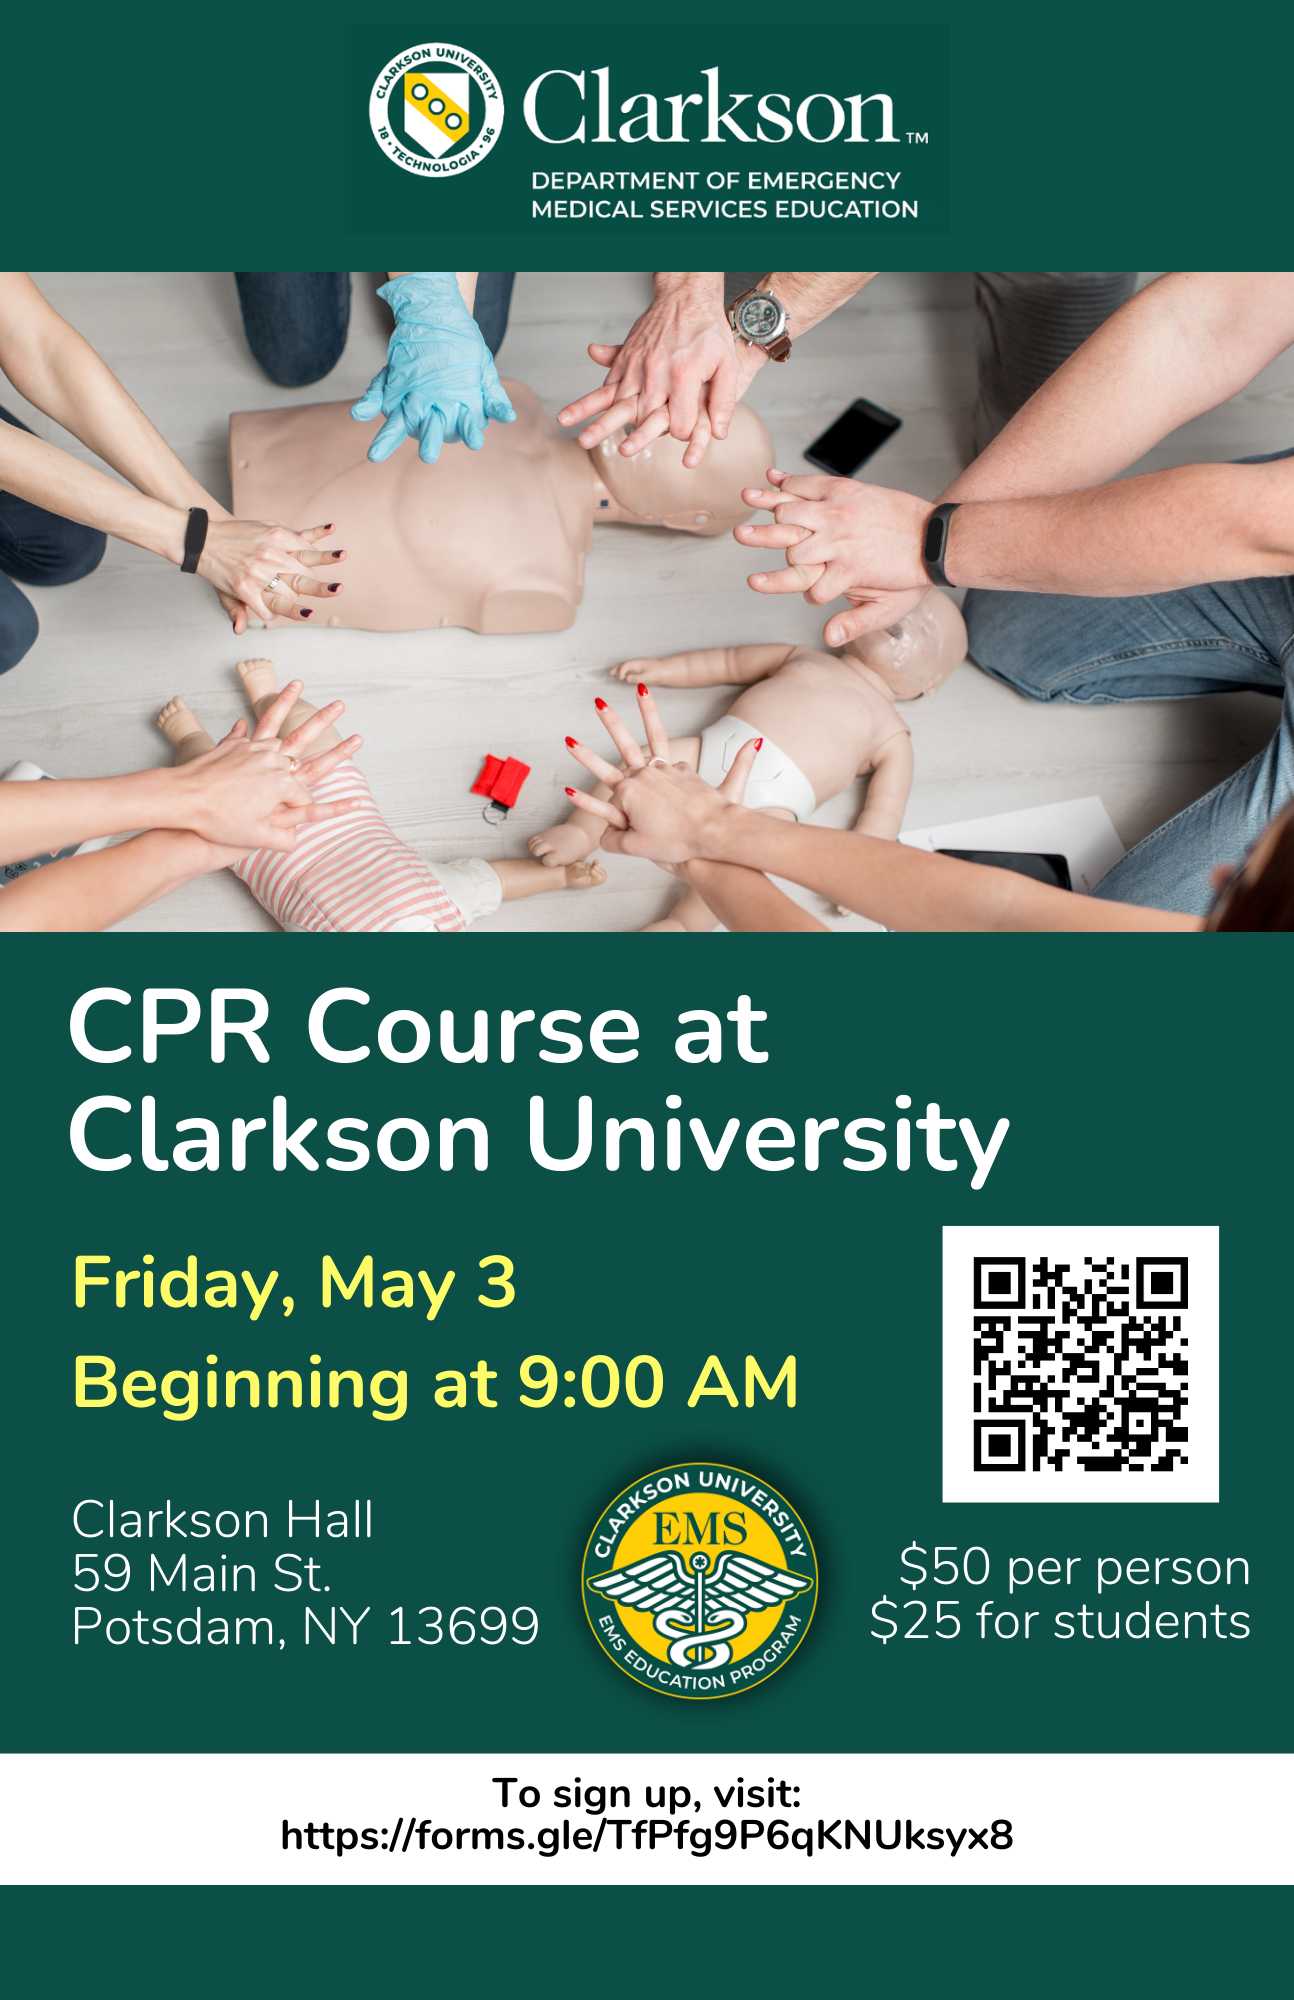 The Lewis School of Health Sciences EMS Education Department is conducting a CPR Class